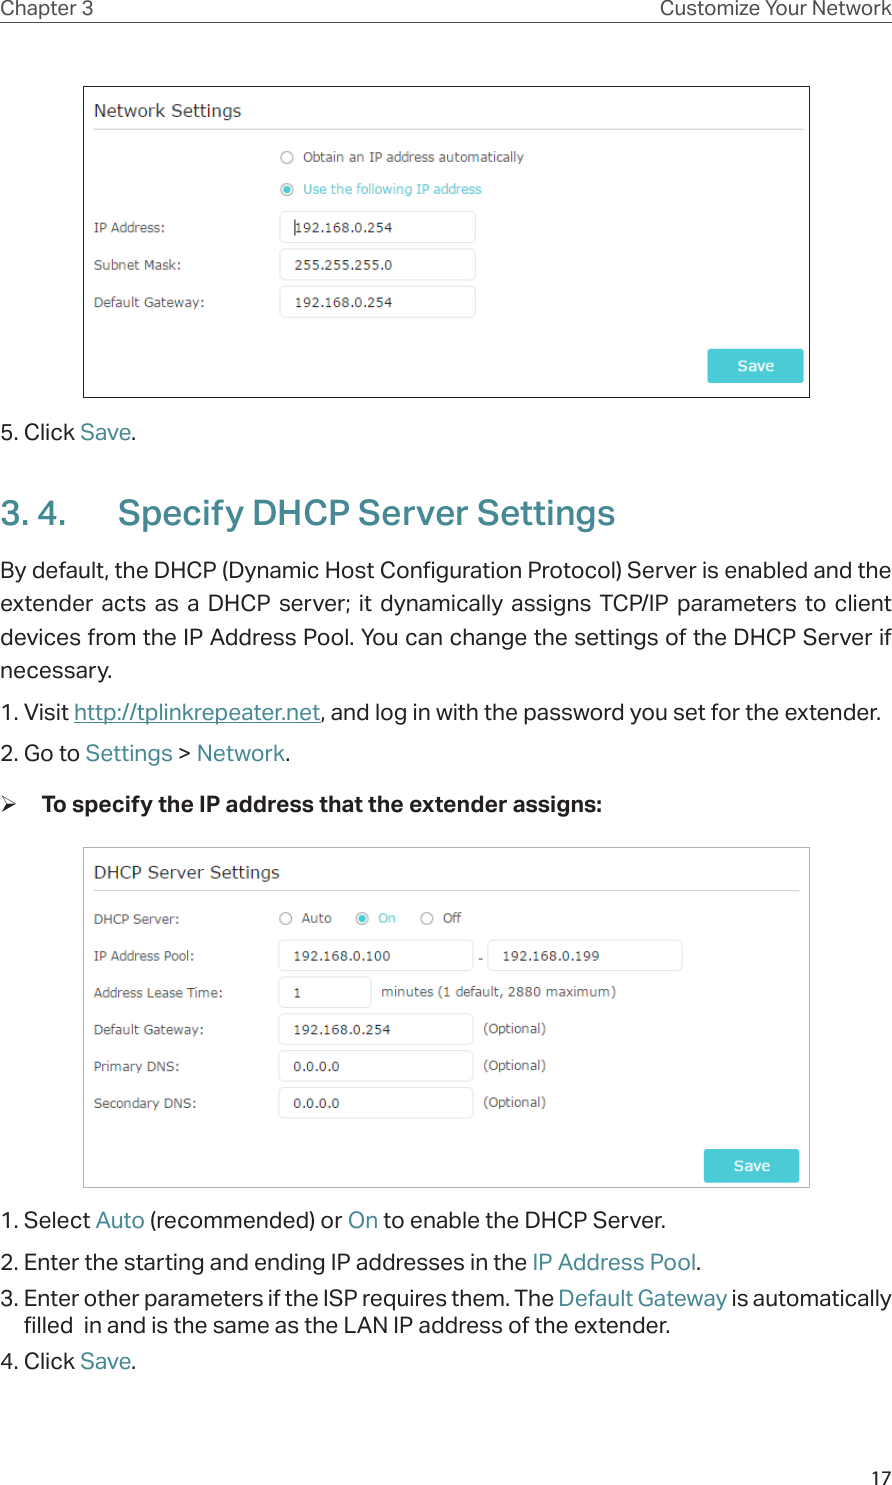 17Chapter 3 Customize Your Network5. Click Save. 3. 4.  Specify DHCP Server SettingsBy default, the DHCP (Dynamic Host Configuration Protocol) Server is enabled and the extender acts as a DHCP server; it dynamically assigns TCP/IP parameters to client devices from the IP Address Pool. You can change the settings of the DHCP Server if necessary.1. Visit http://tplinkrepeater.net, and log in with the password you set for the extender.2. Go to Settings &gt; Network. ¾To specify the IP address that the extender assigns:1. Select Auto (recommended) or On to enable the DHCP Server.2. Enter the starting and ending IP addresses in the IP Address Pool.3. Enter other parameters if the ISP requires them. The Default Gateway is automatically filled  in and is the same as the LAN IP address of the extender.4. Click Save.